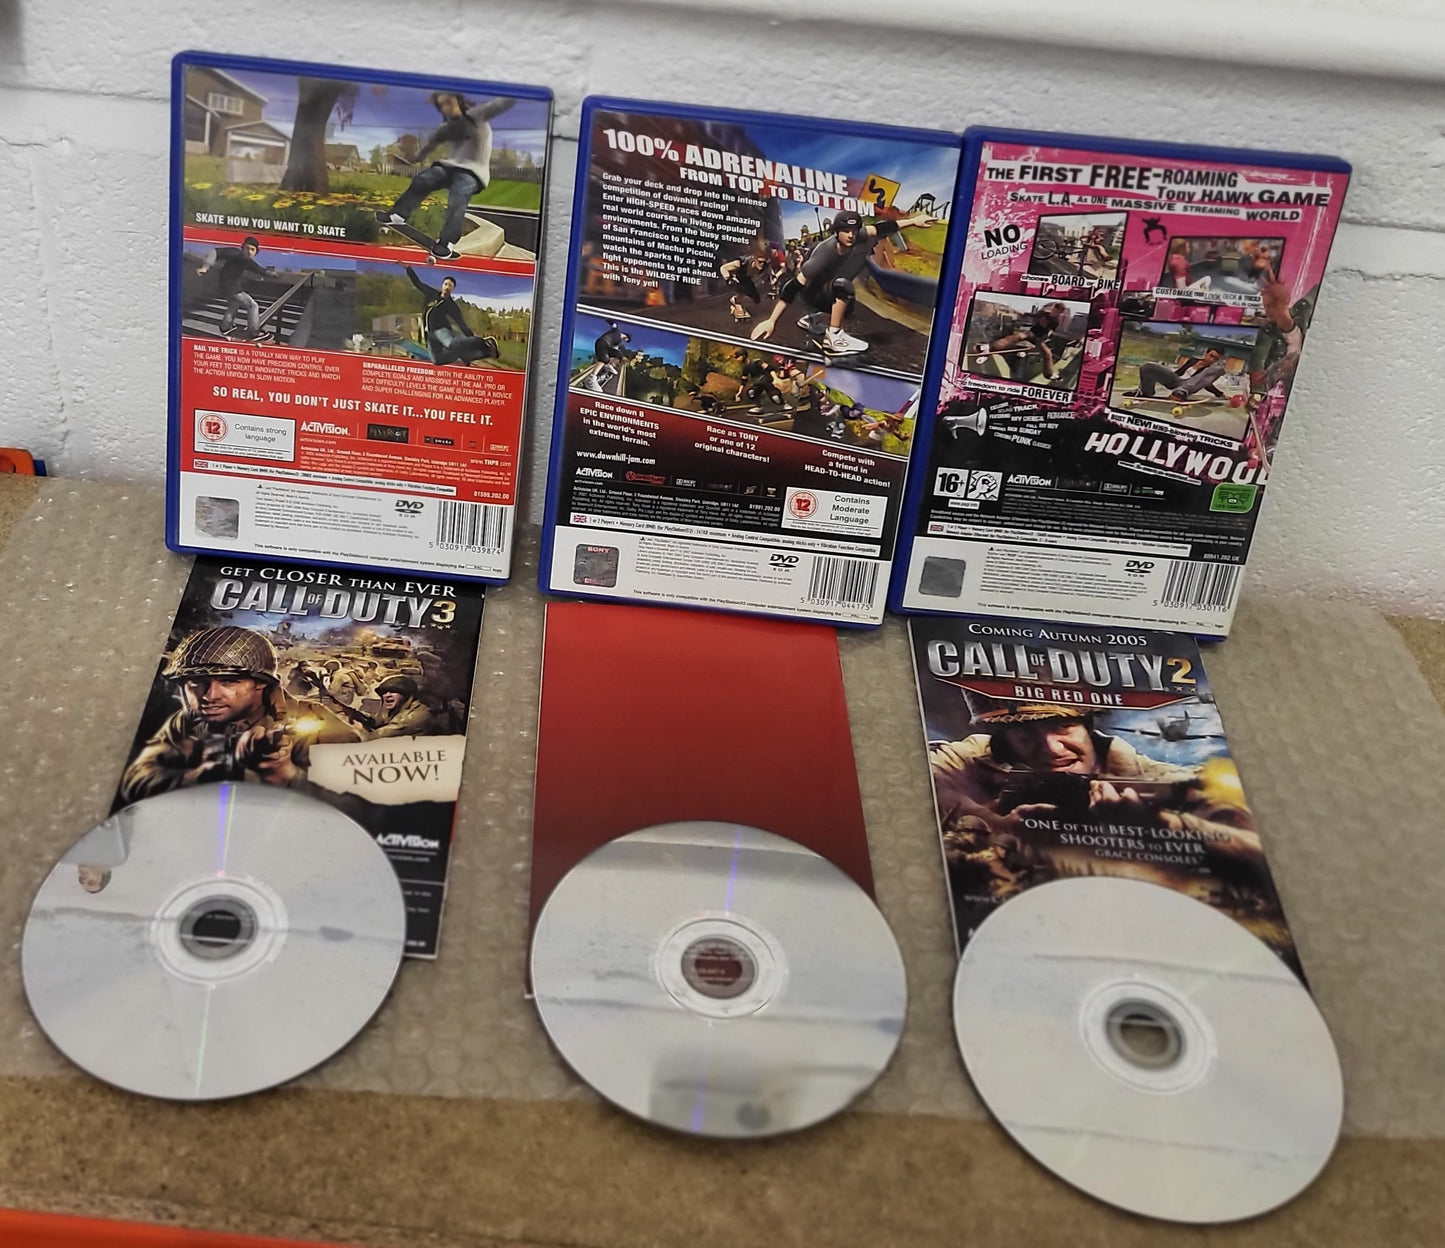 Tony Hawk's Project 8, Downhill Jam & American Wasteland Sony Playstation 2 (PS2) Game Bundle